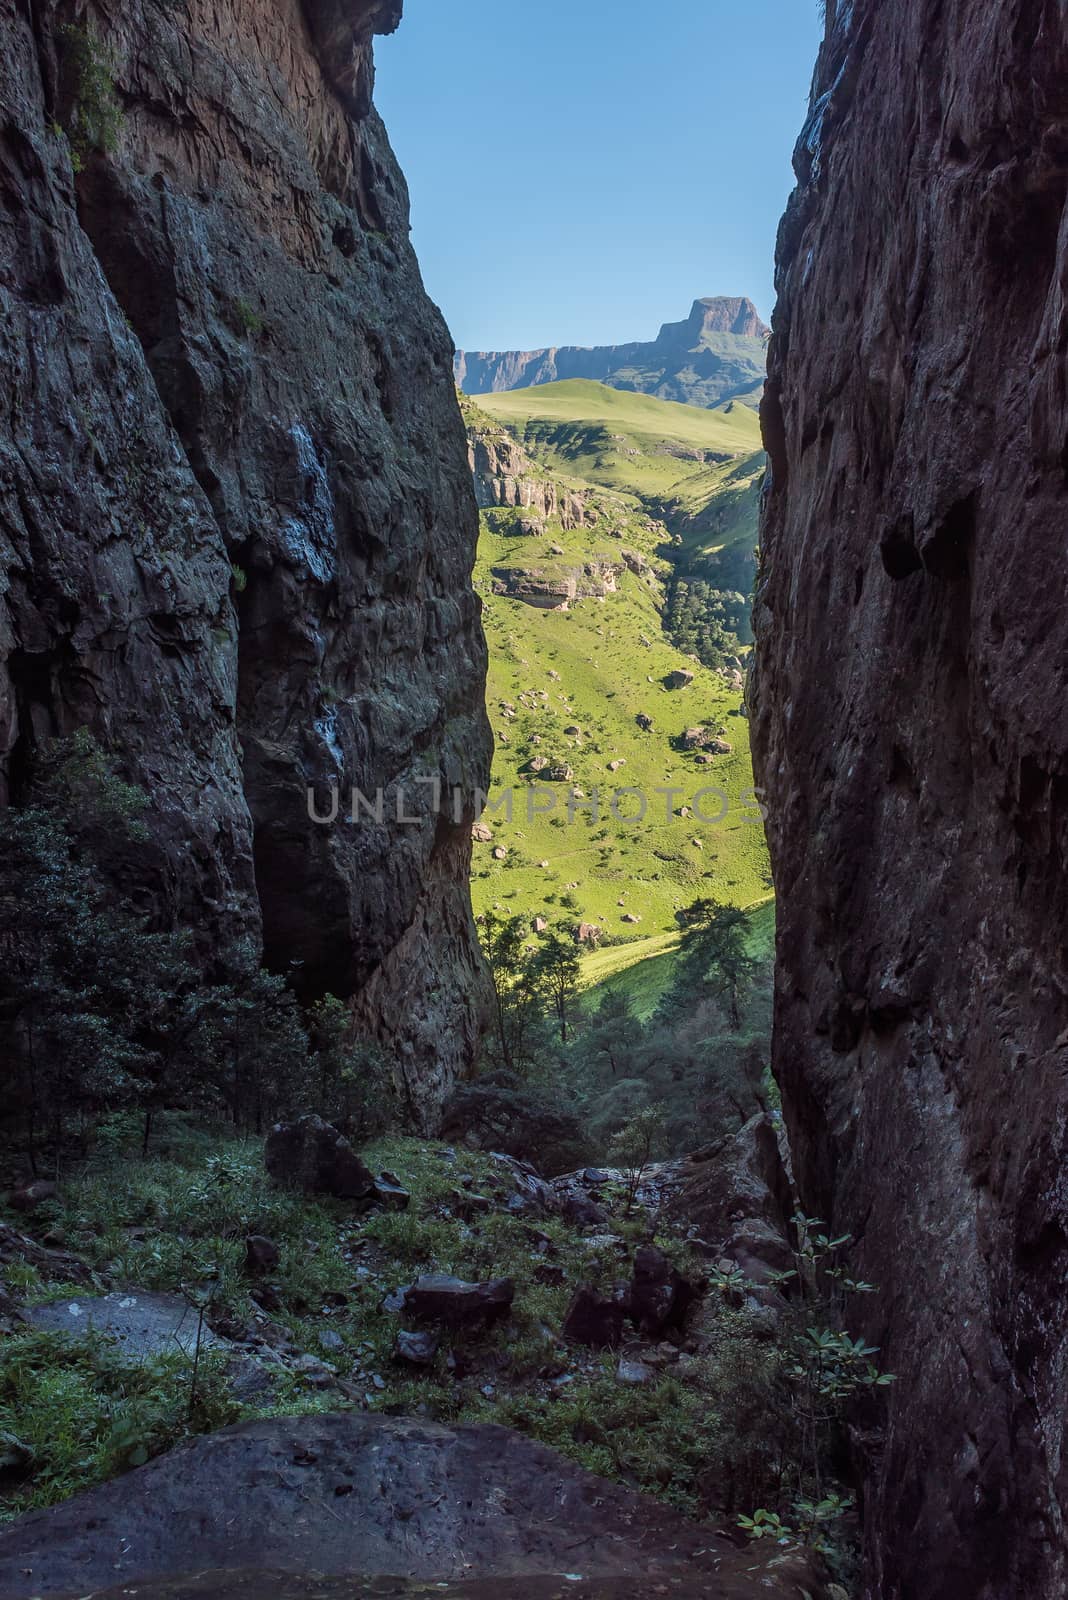 View from the Crack near Mahai in the Drakensberg by dpreezg